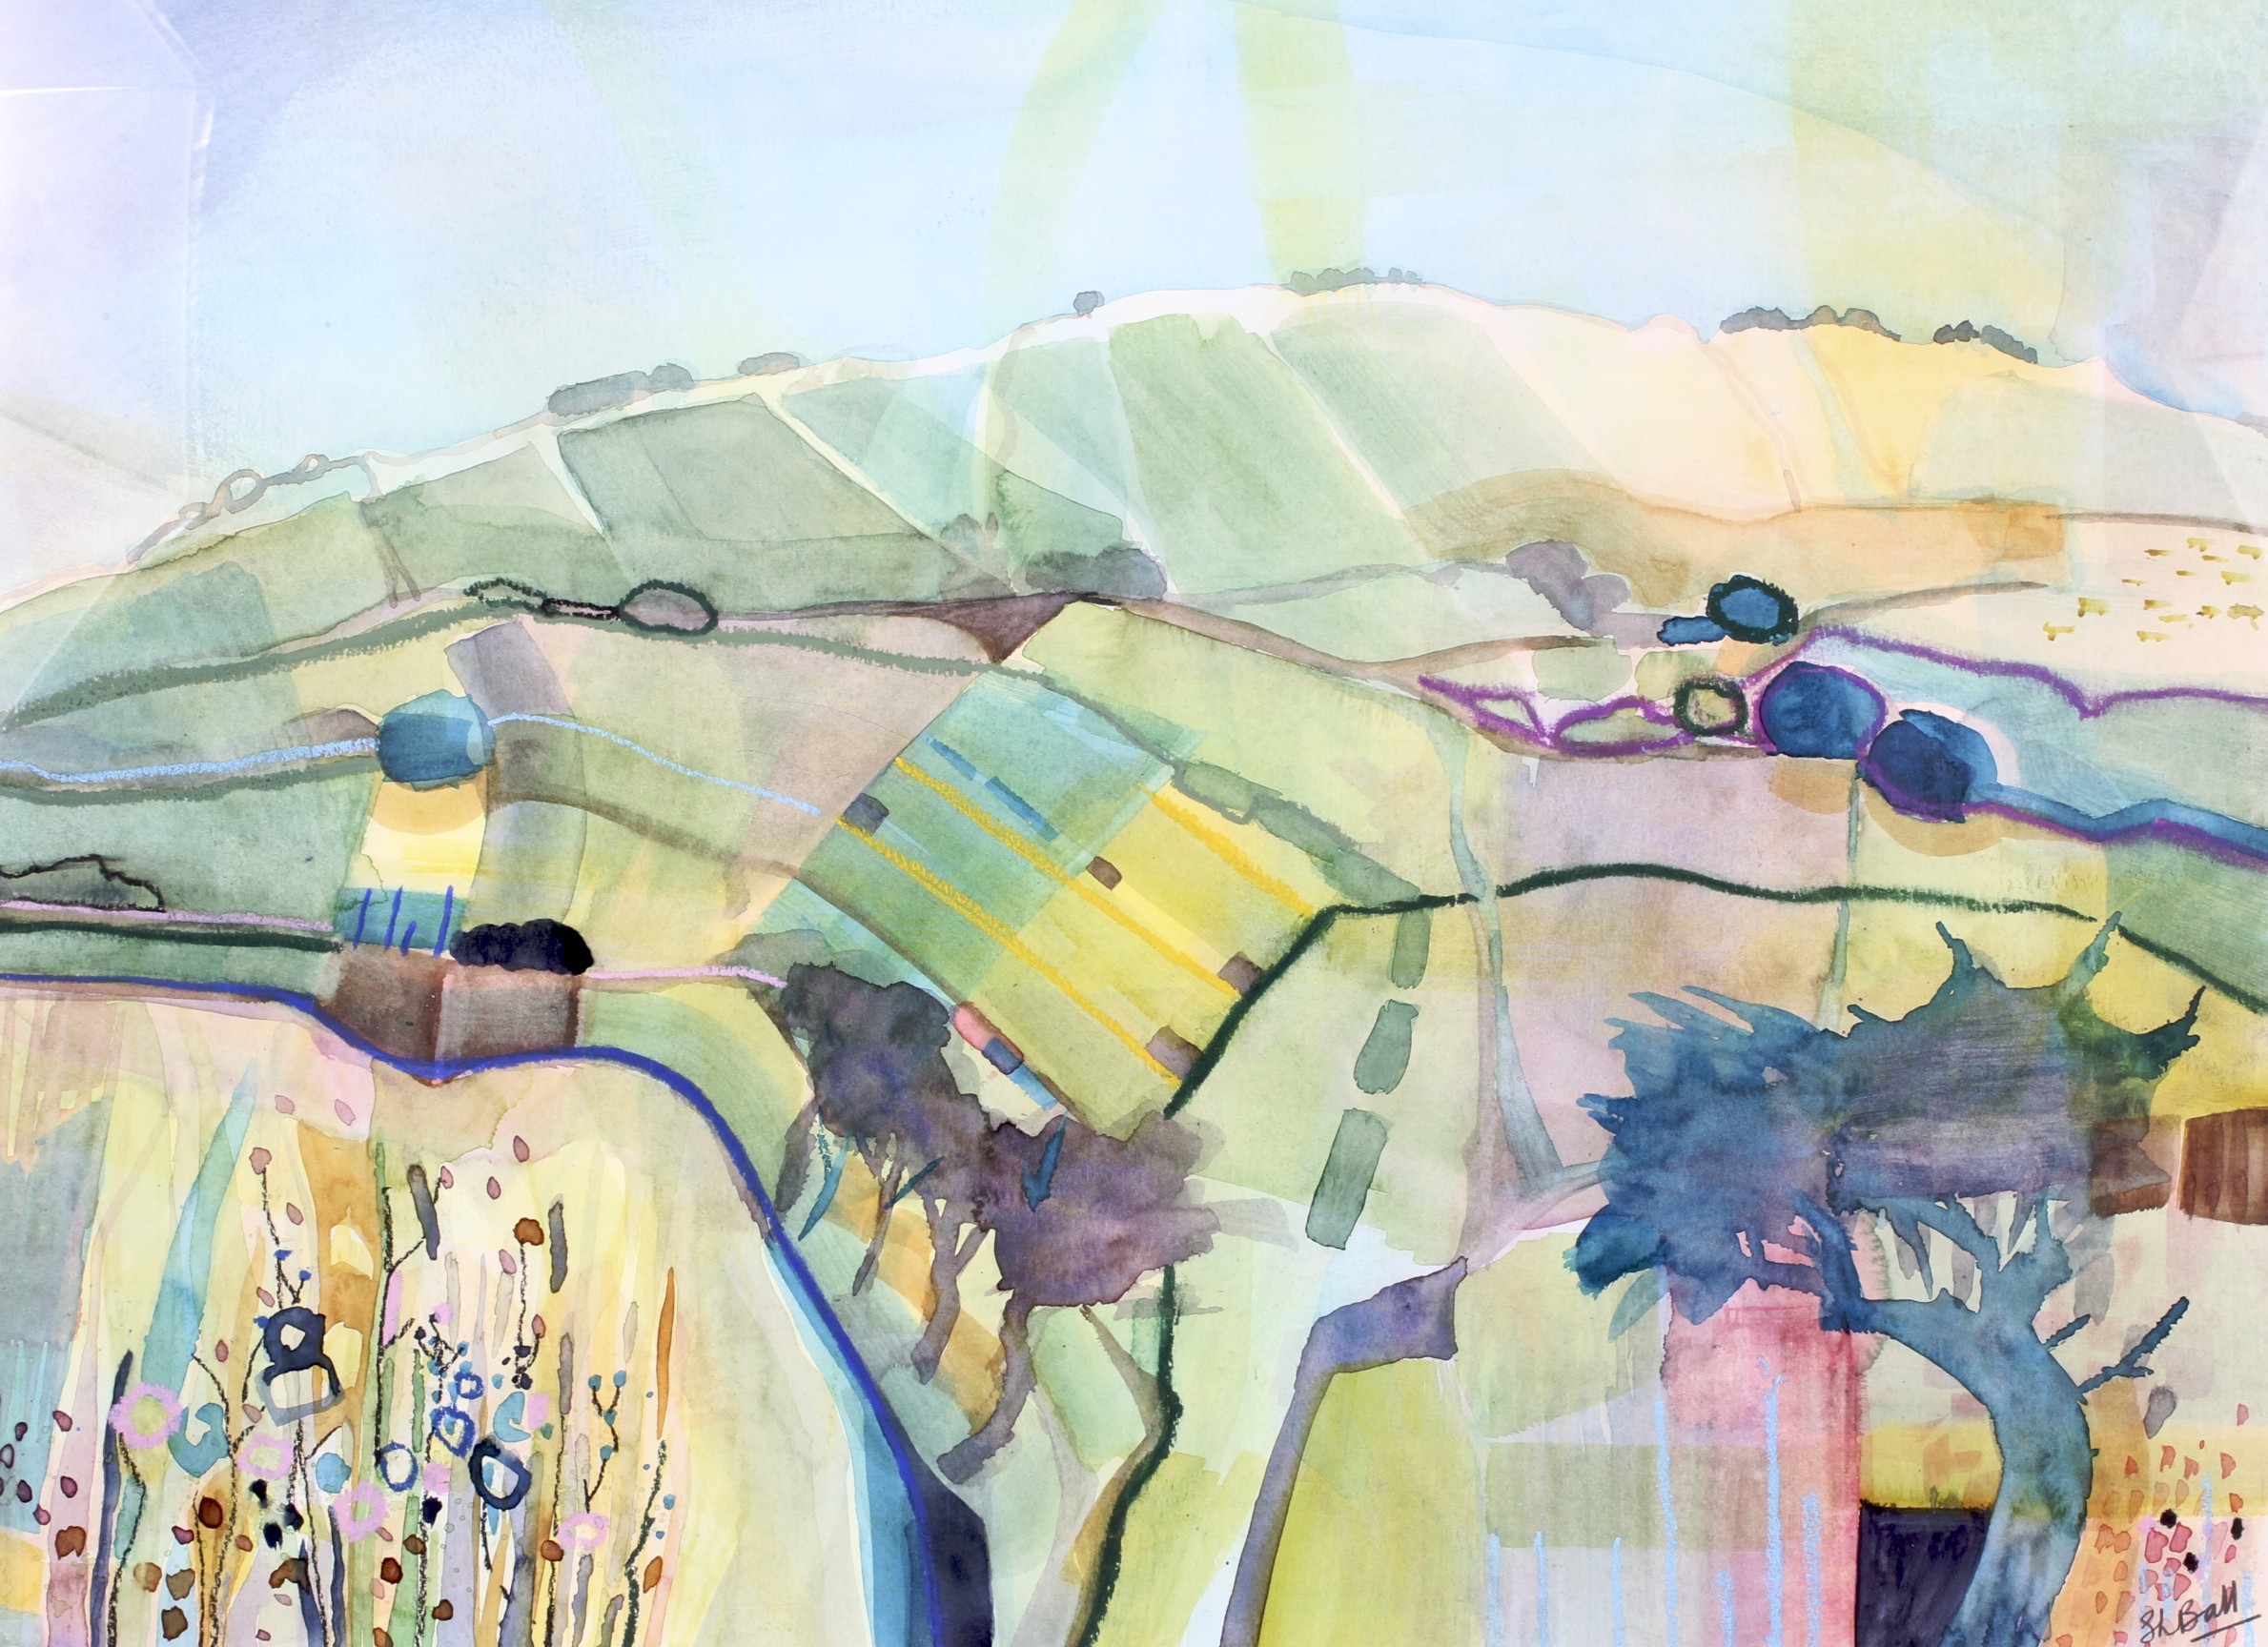 Sarah Ball (21st Century), The Valency Valley, watercolour on paper.